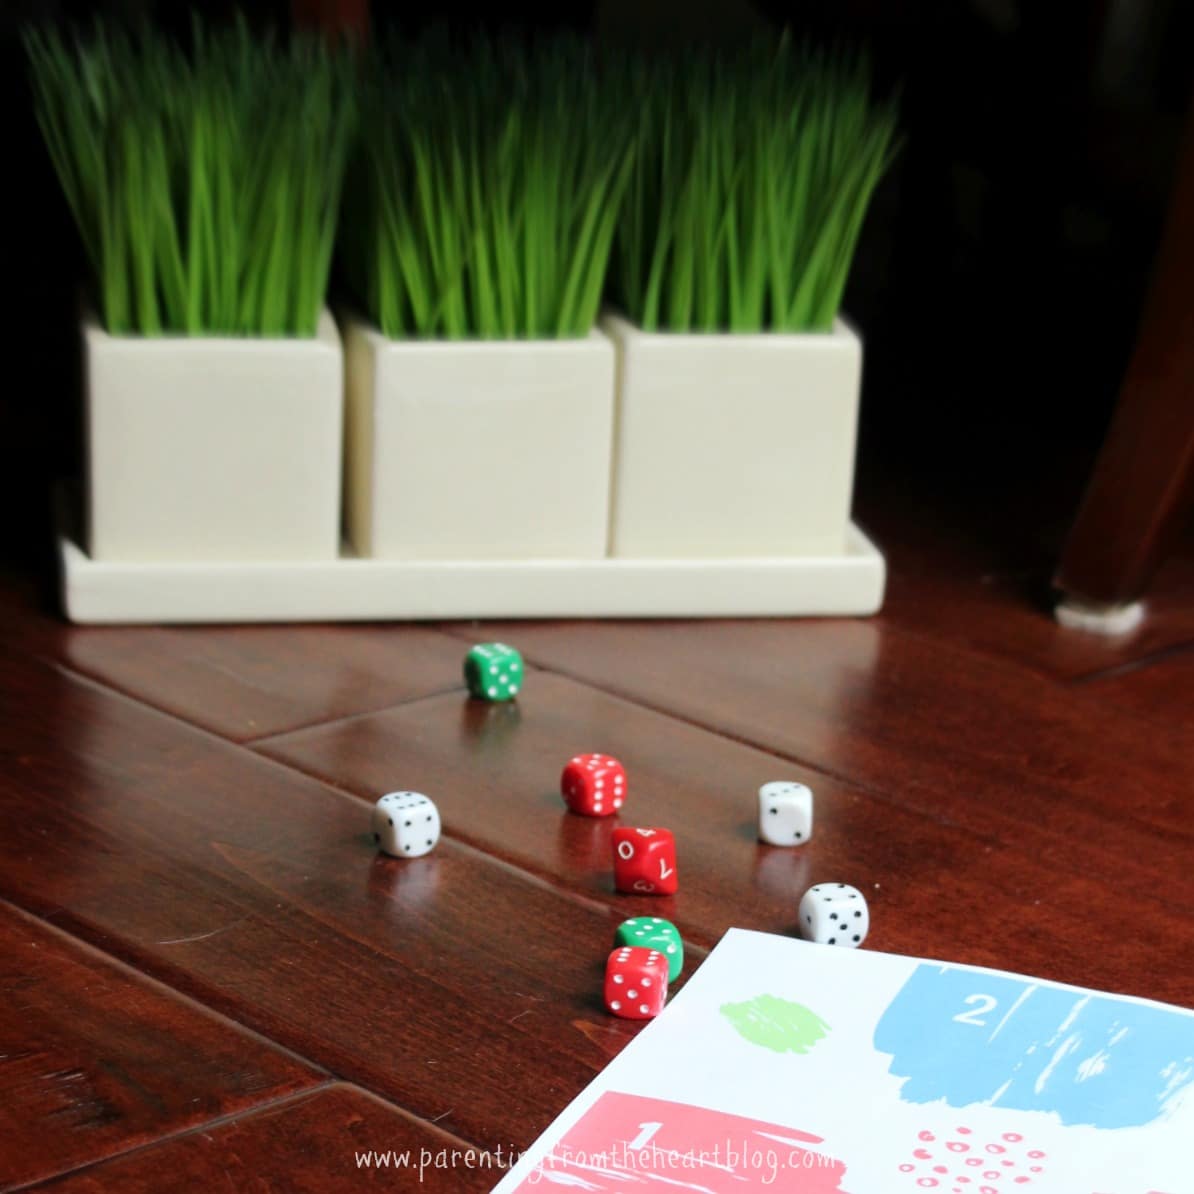 These dice games are excellent and helpful play based learning strategies to teach numeracy (early math). Preschoolers will learn number recognition, greater than and less than, number sequencing and more!